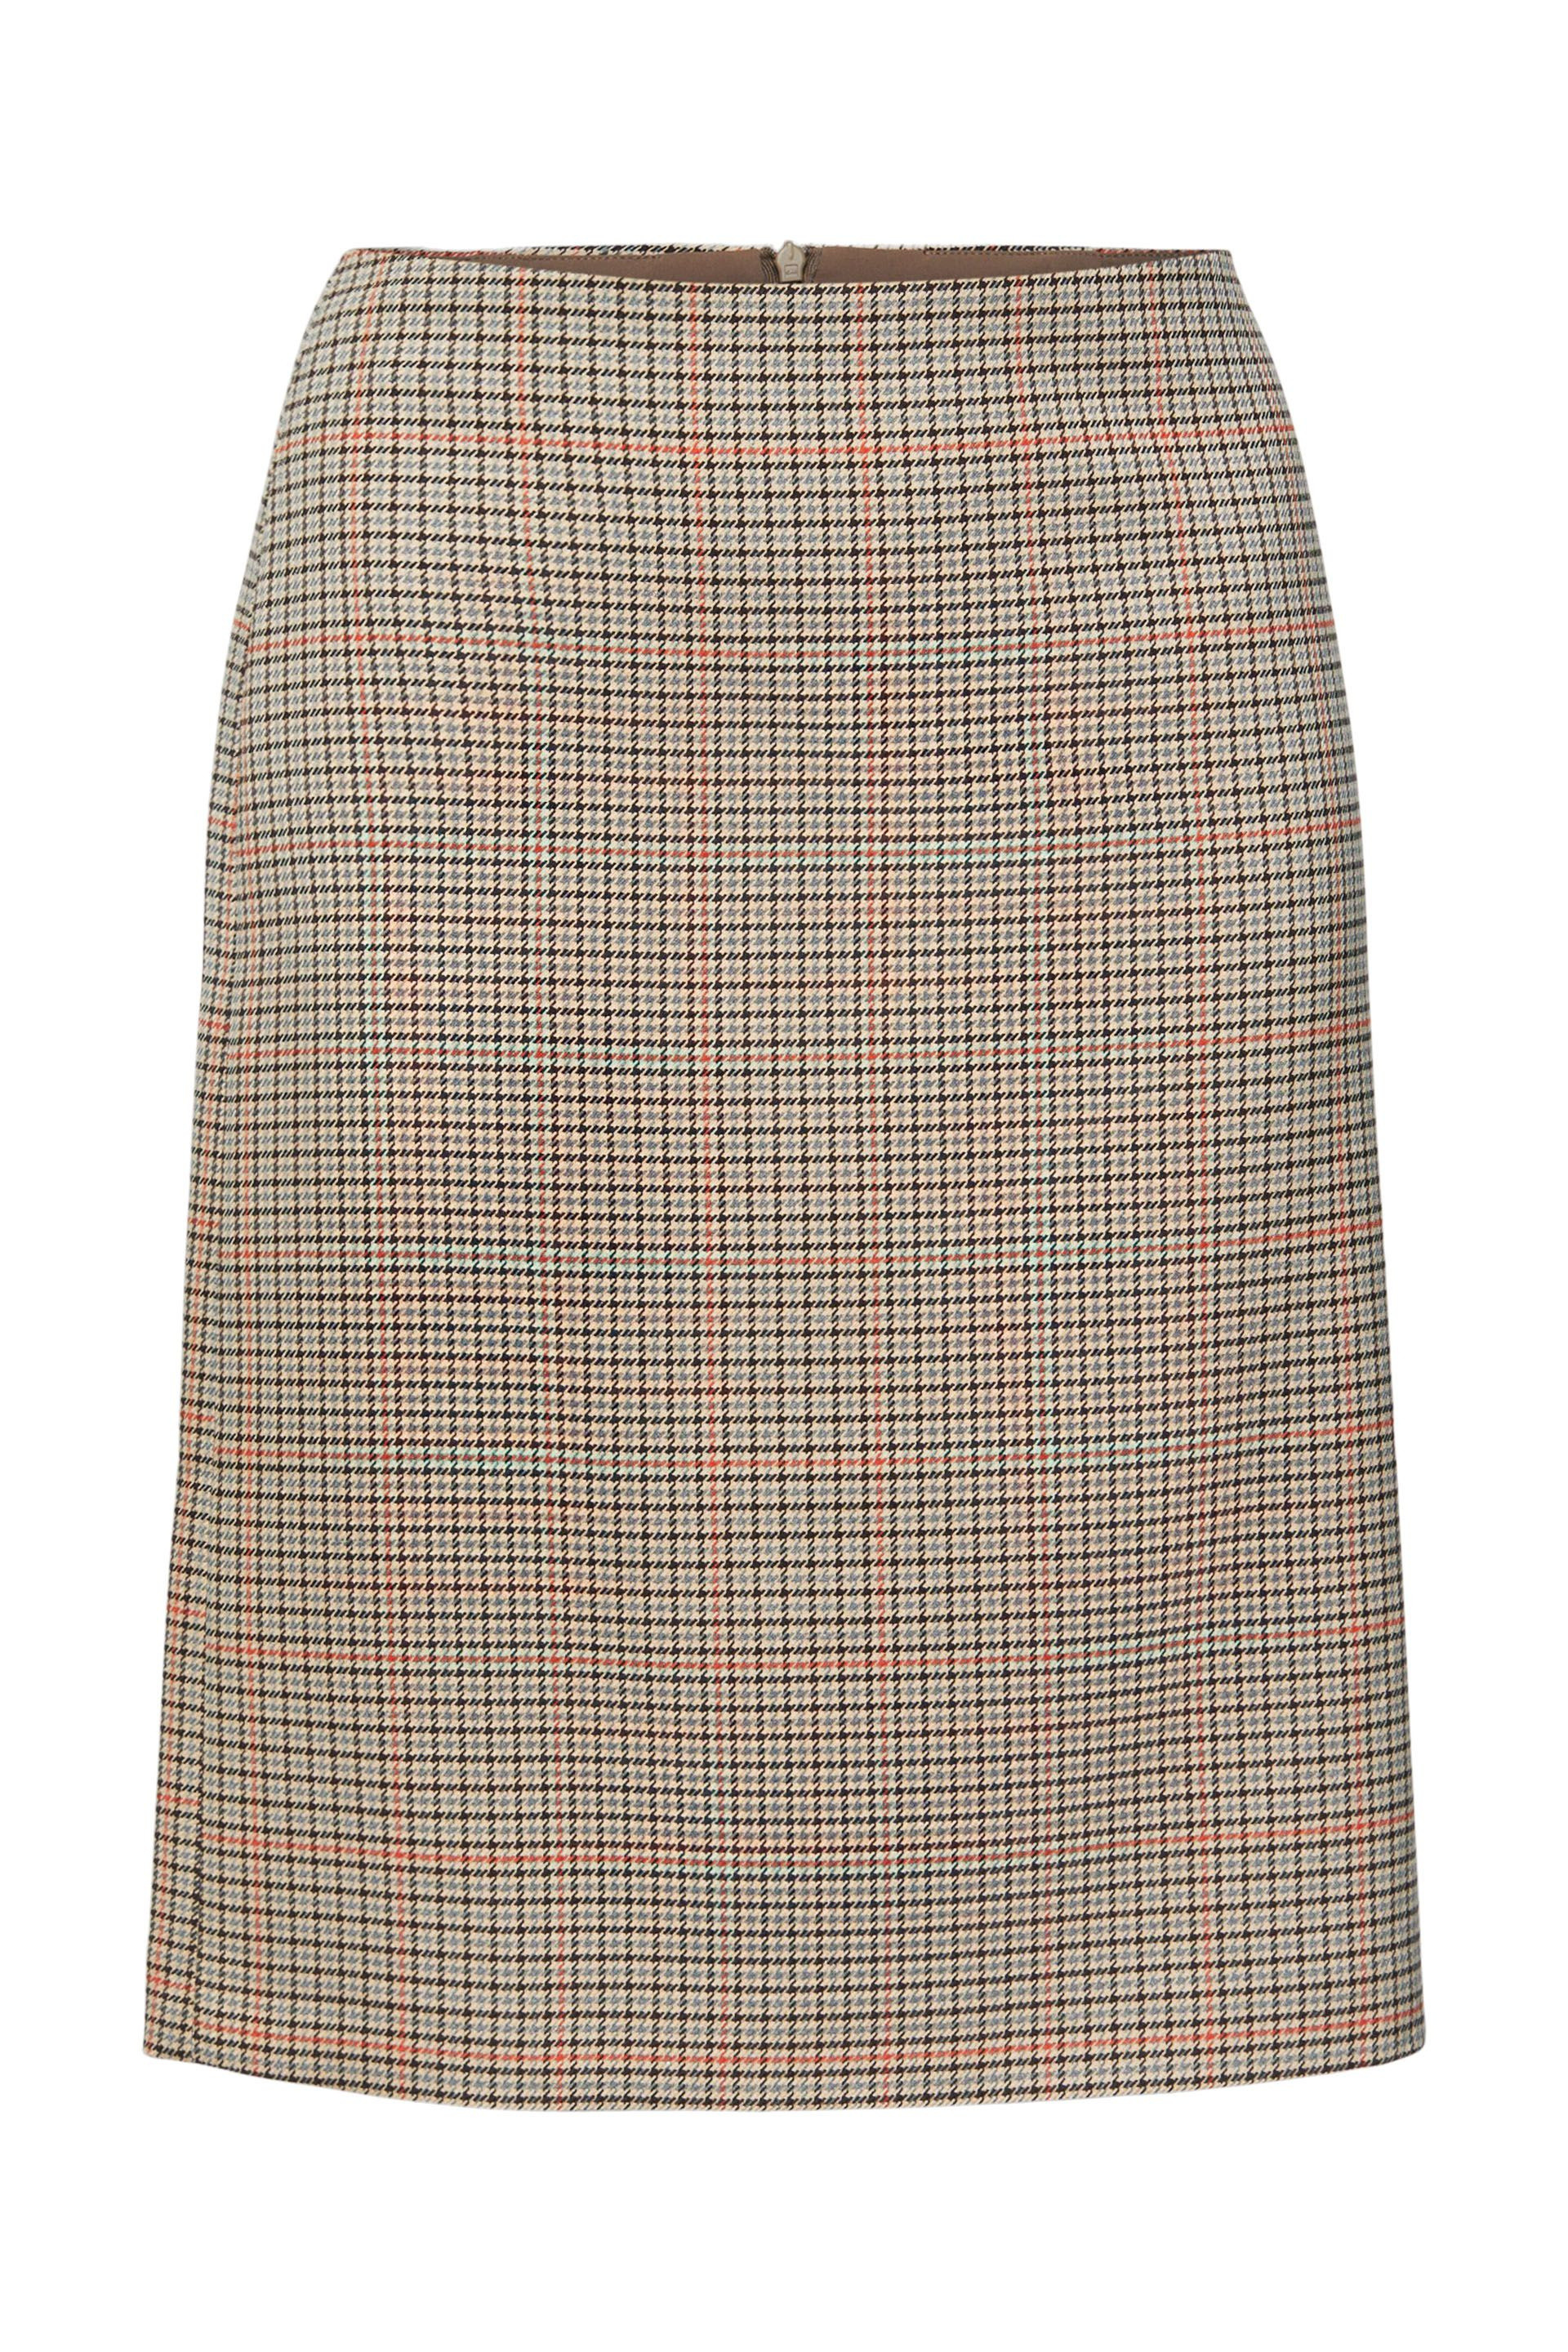 Midi skirt with a check pattern, Beige, large image number 0